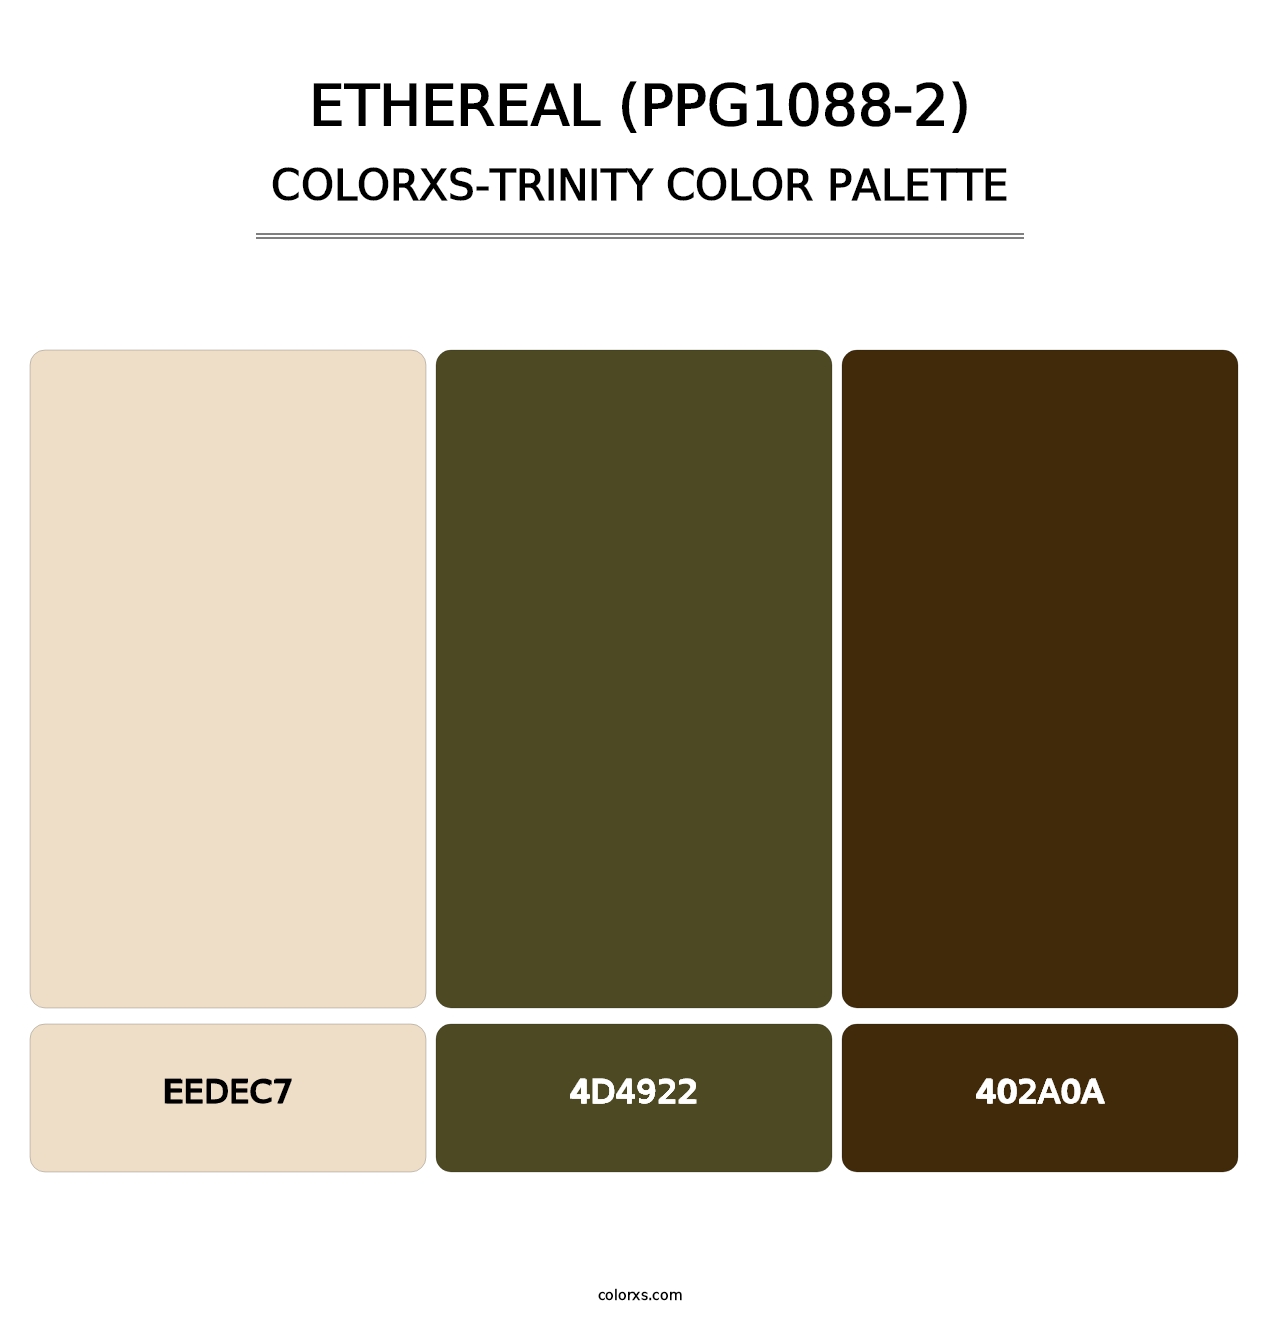 Ethereal (PPG1088-2) - Colorxs Trinity Palette